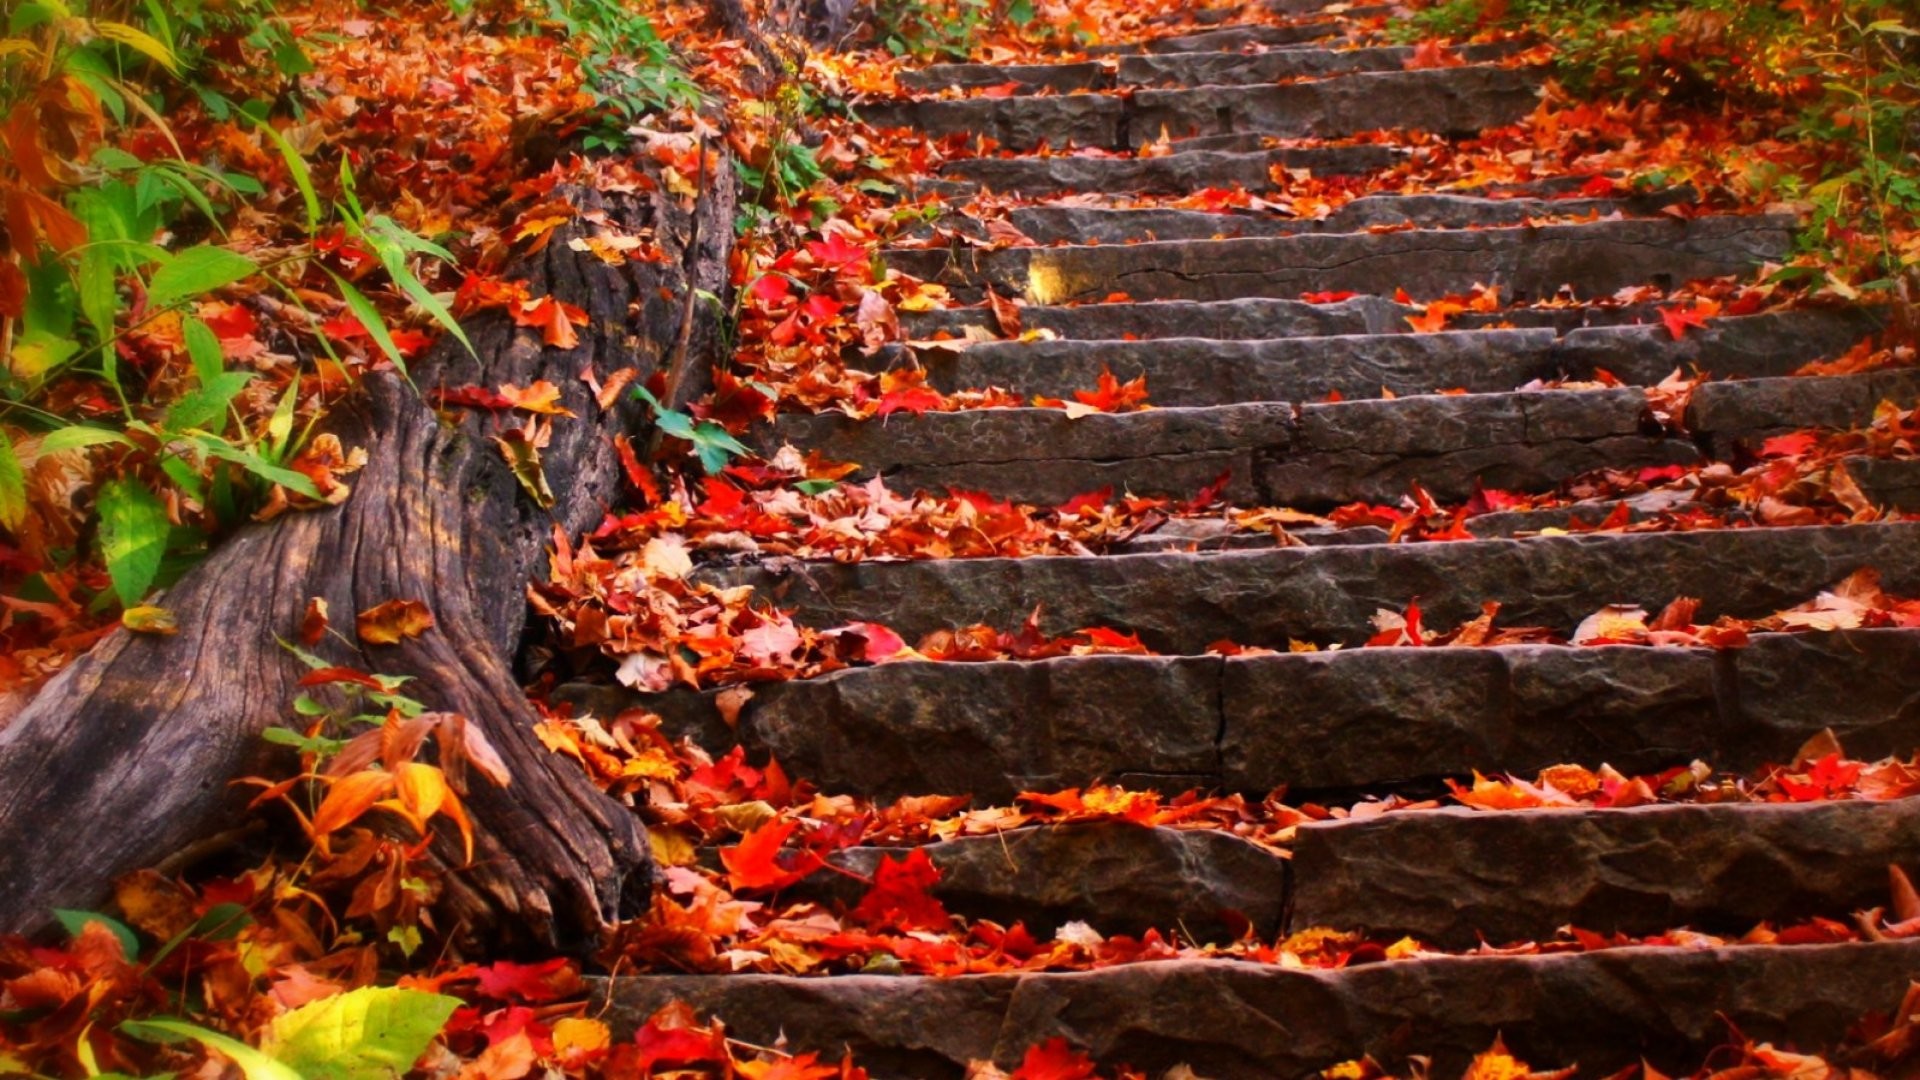 Autumn steps fall foliage leaves wallpaper 524349 WallpaperUP